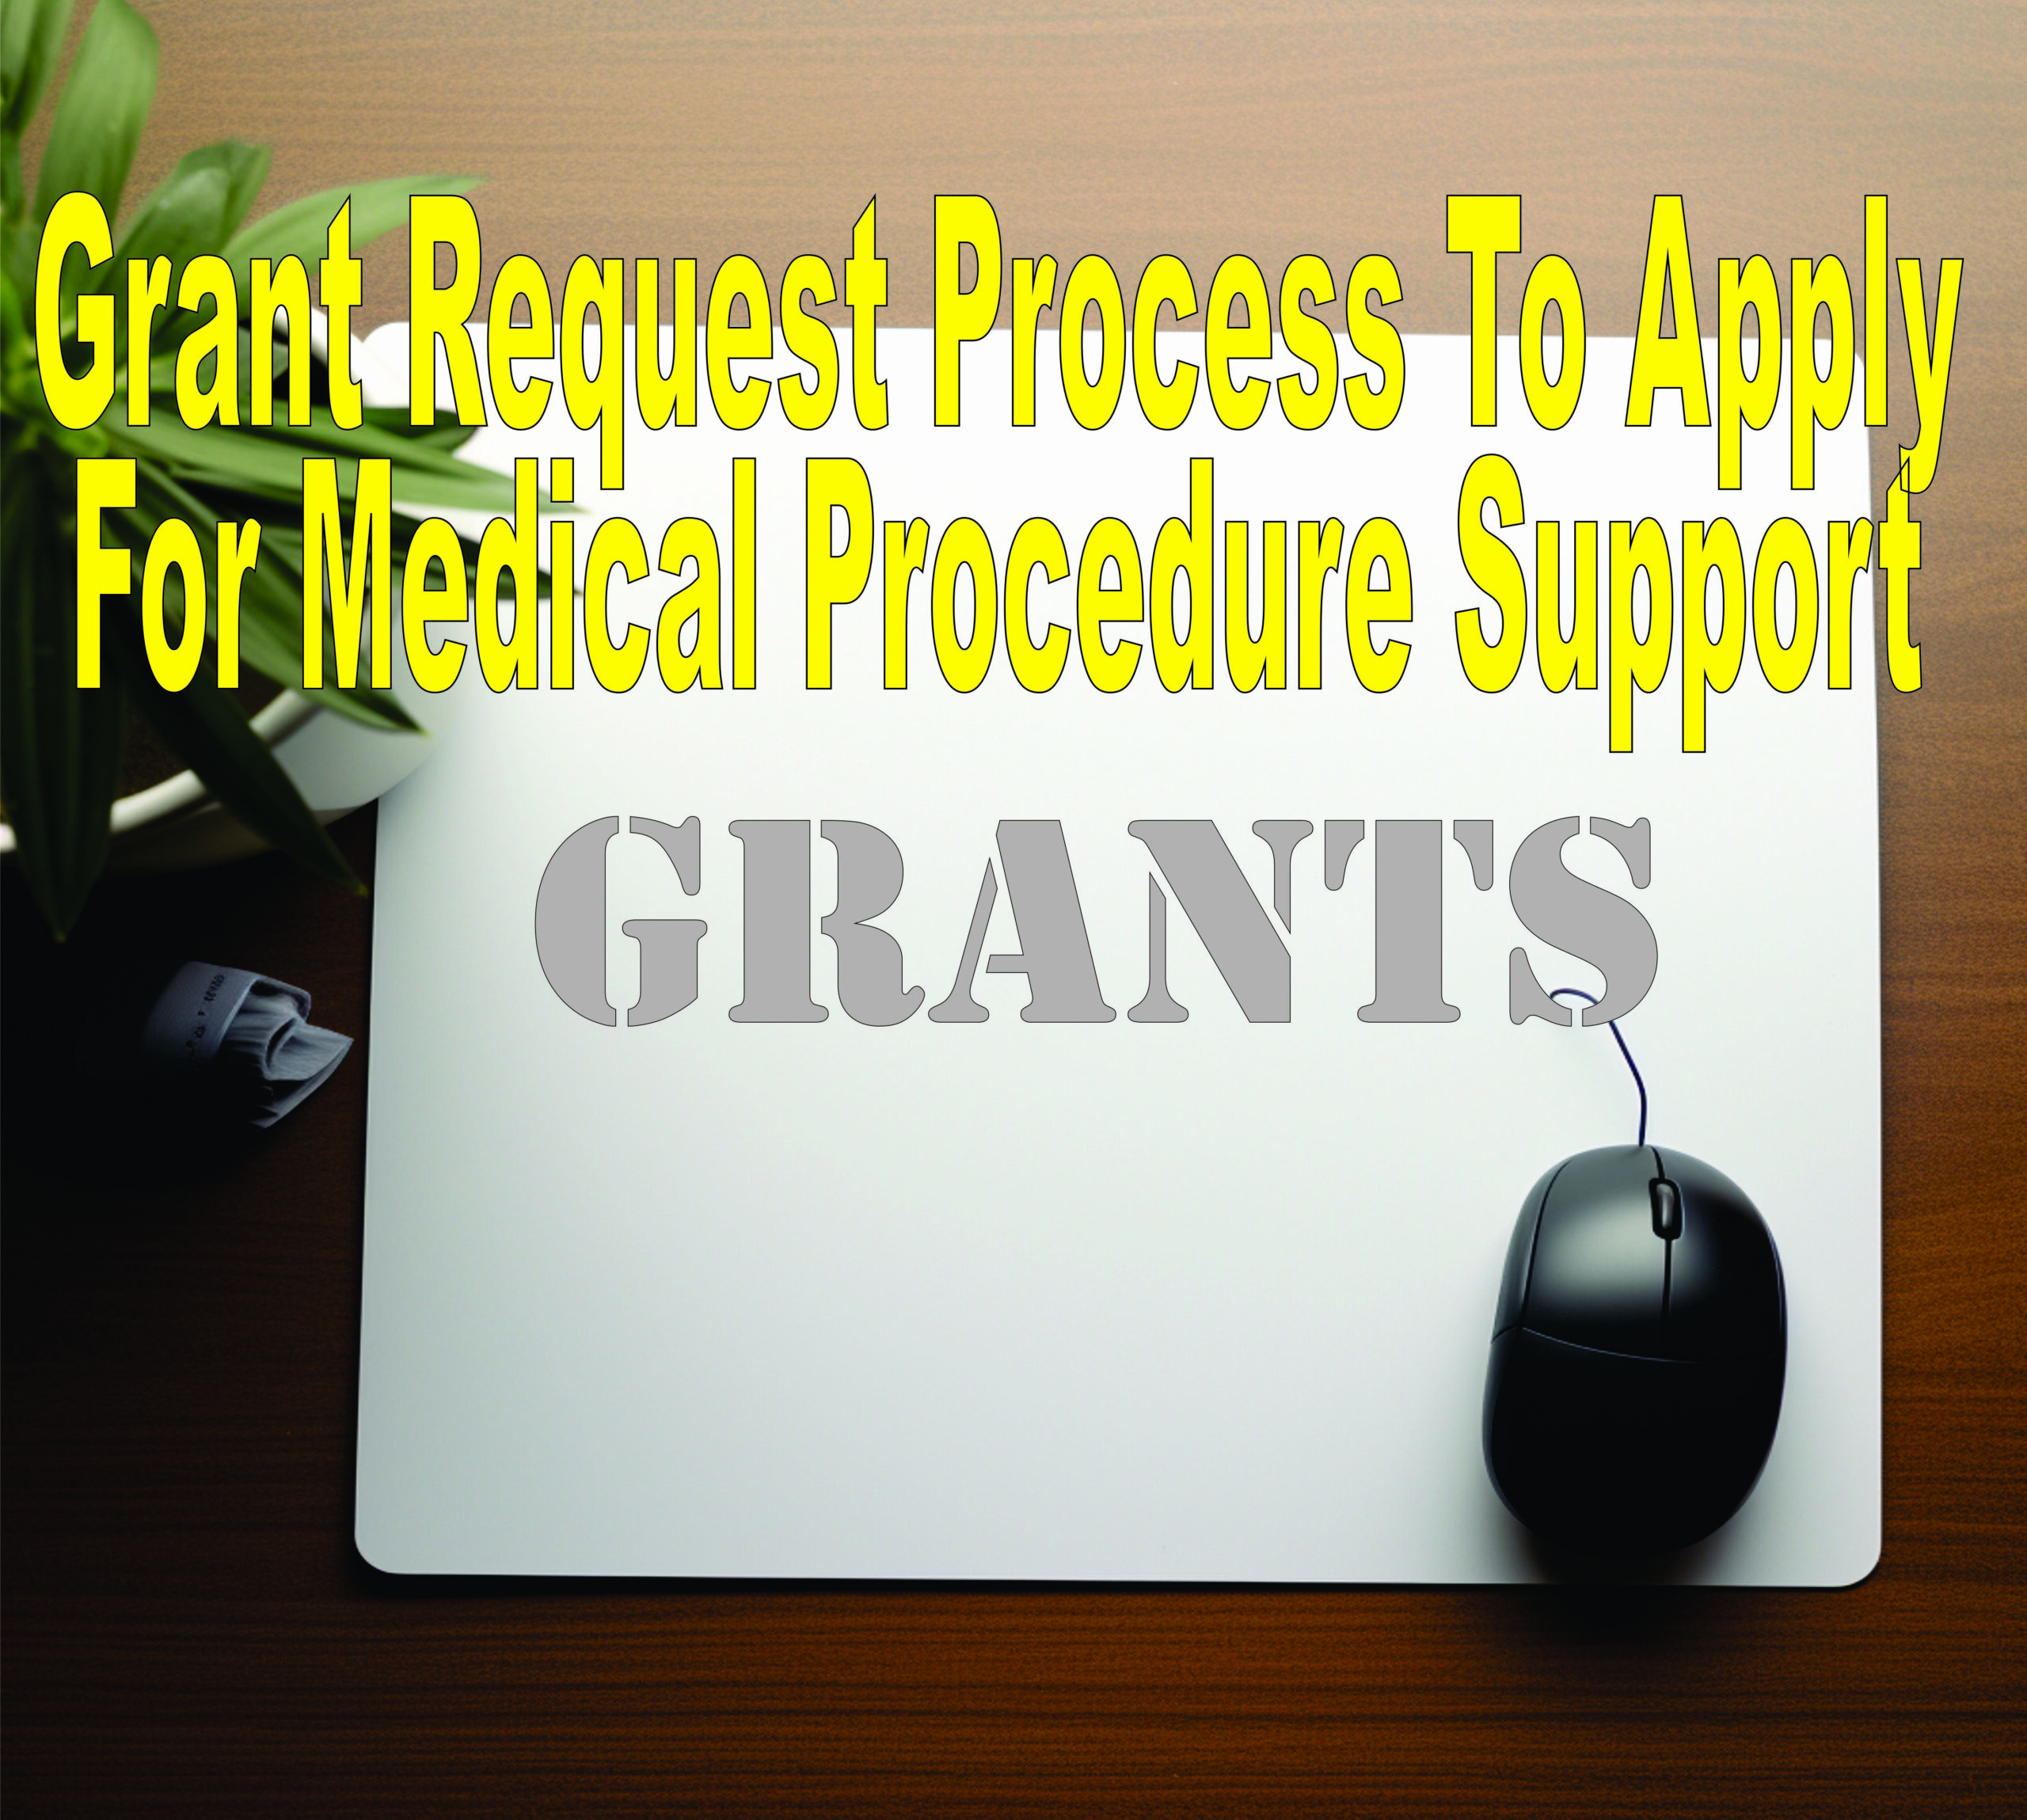 Grant Request Process To Apply For Medical Procedure Support